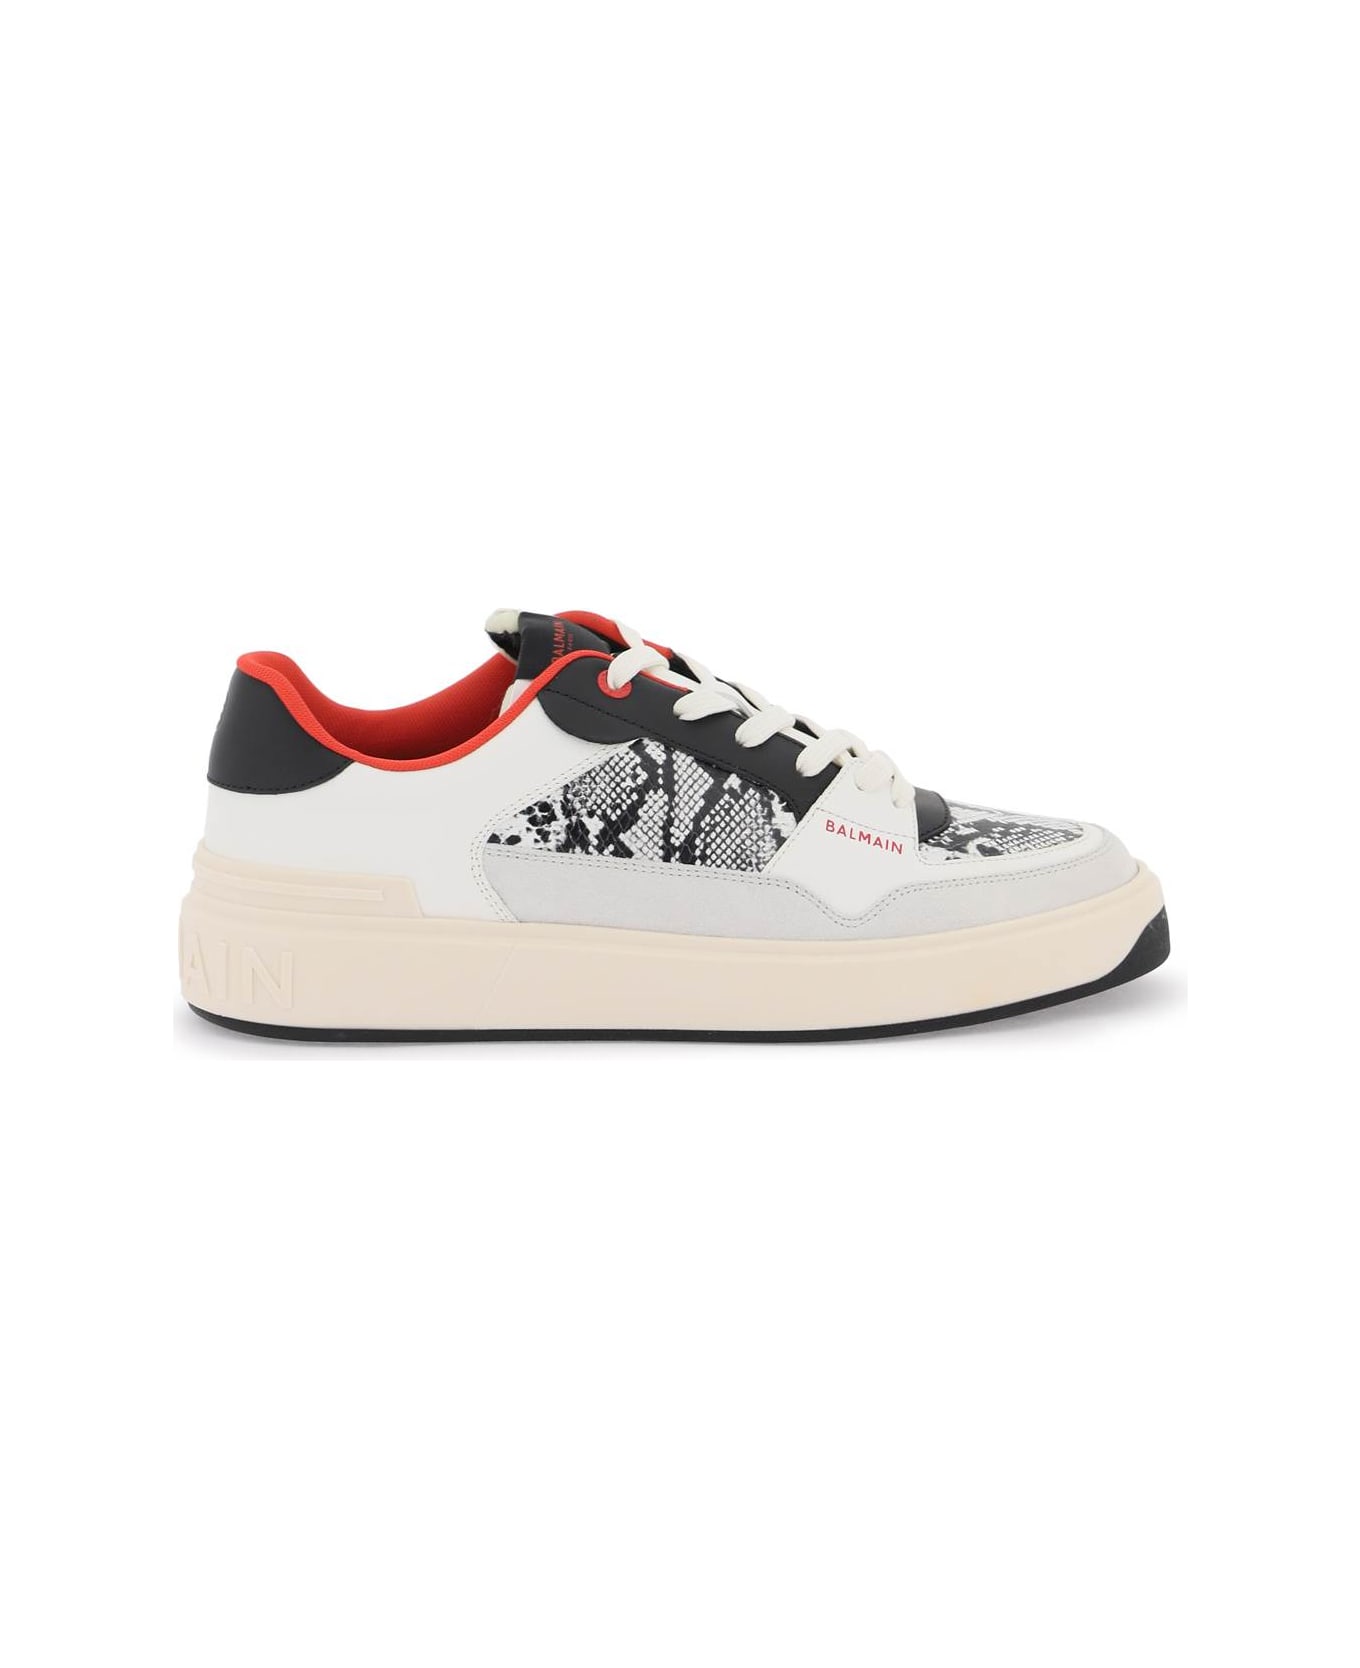 Balmain B-court Flip Sneakers In Python-effect Leather - GRIS ROUGE VIF (White) スニーカー